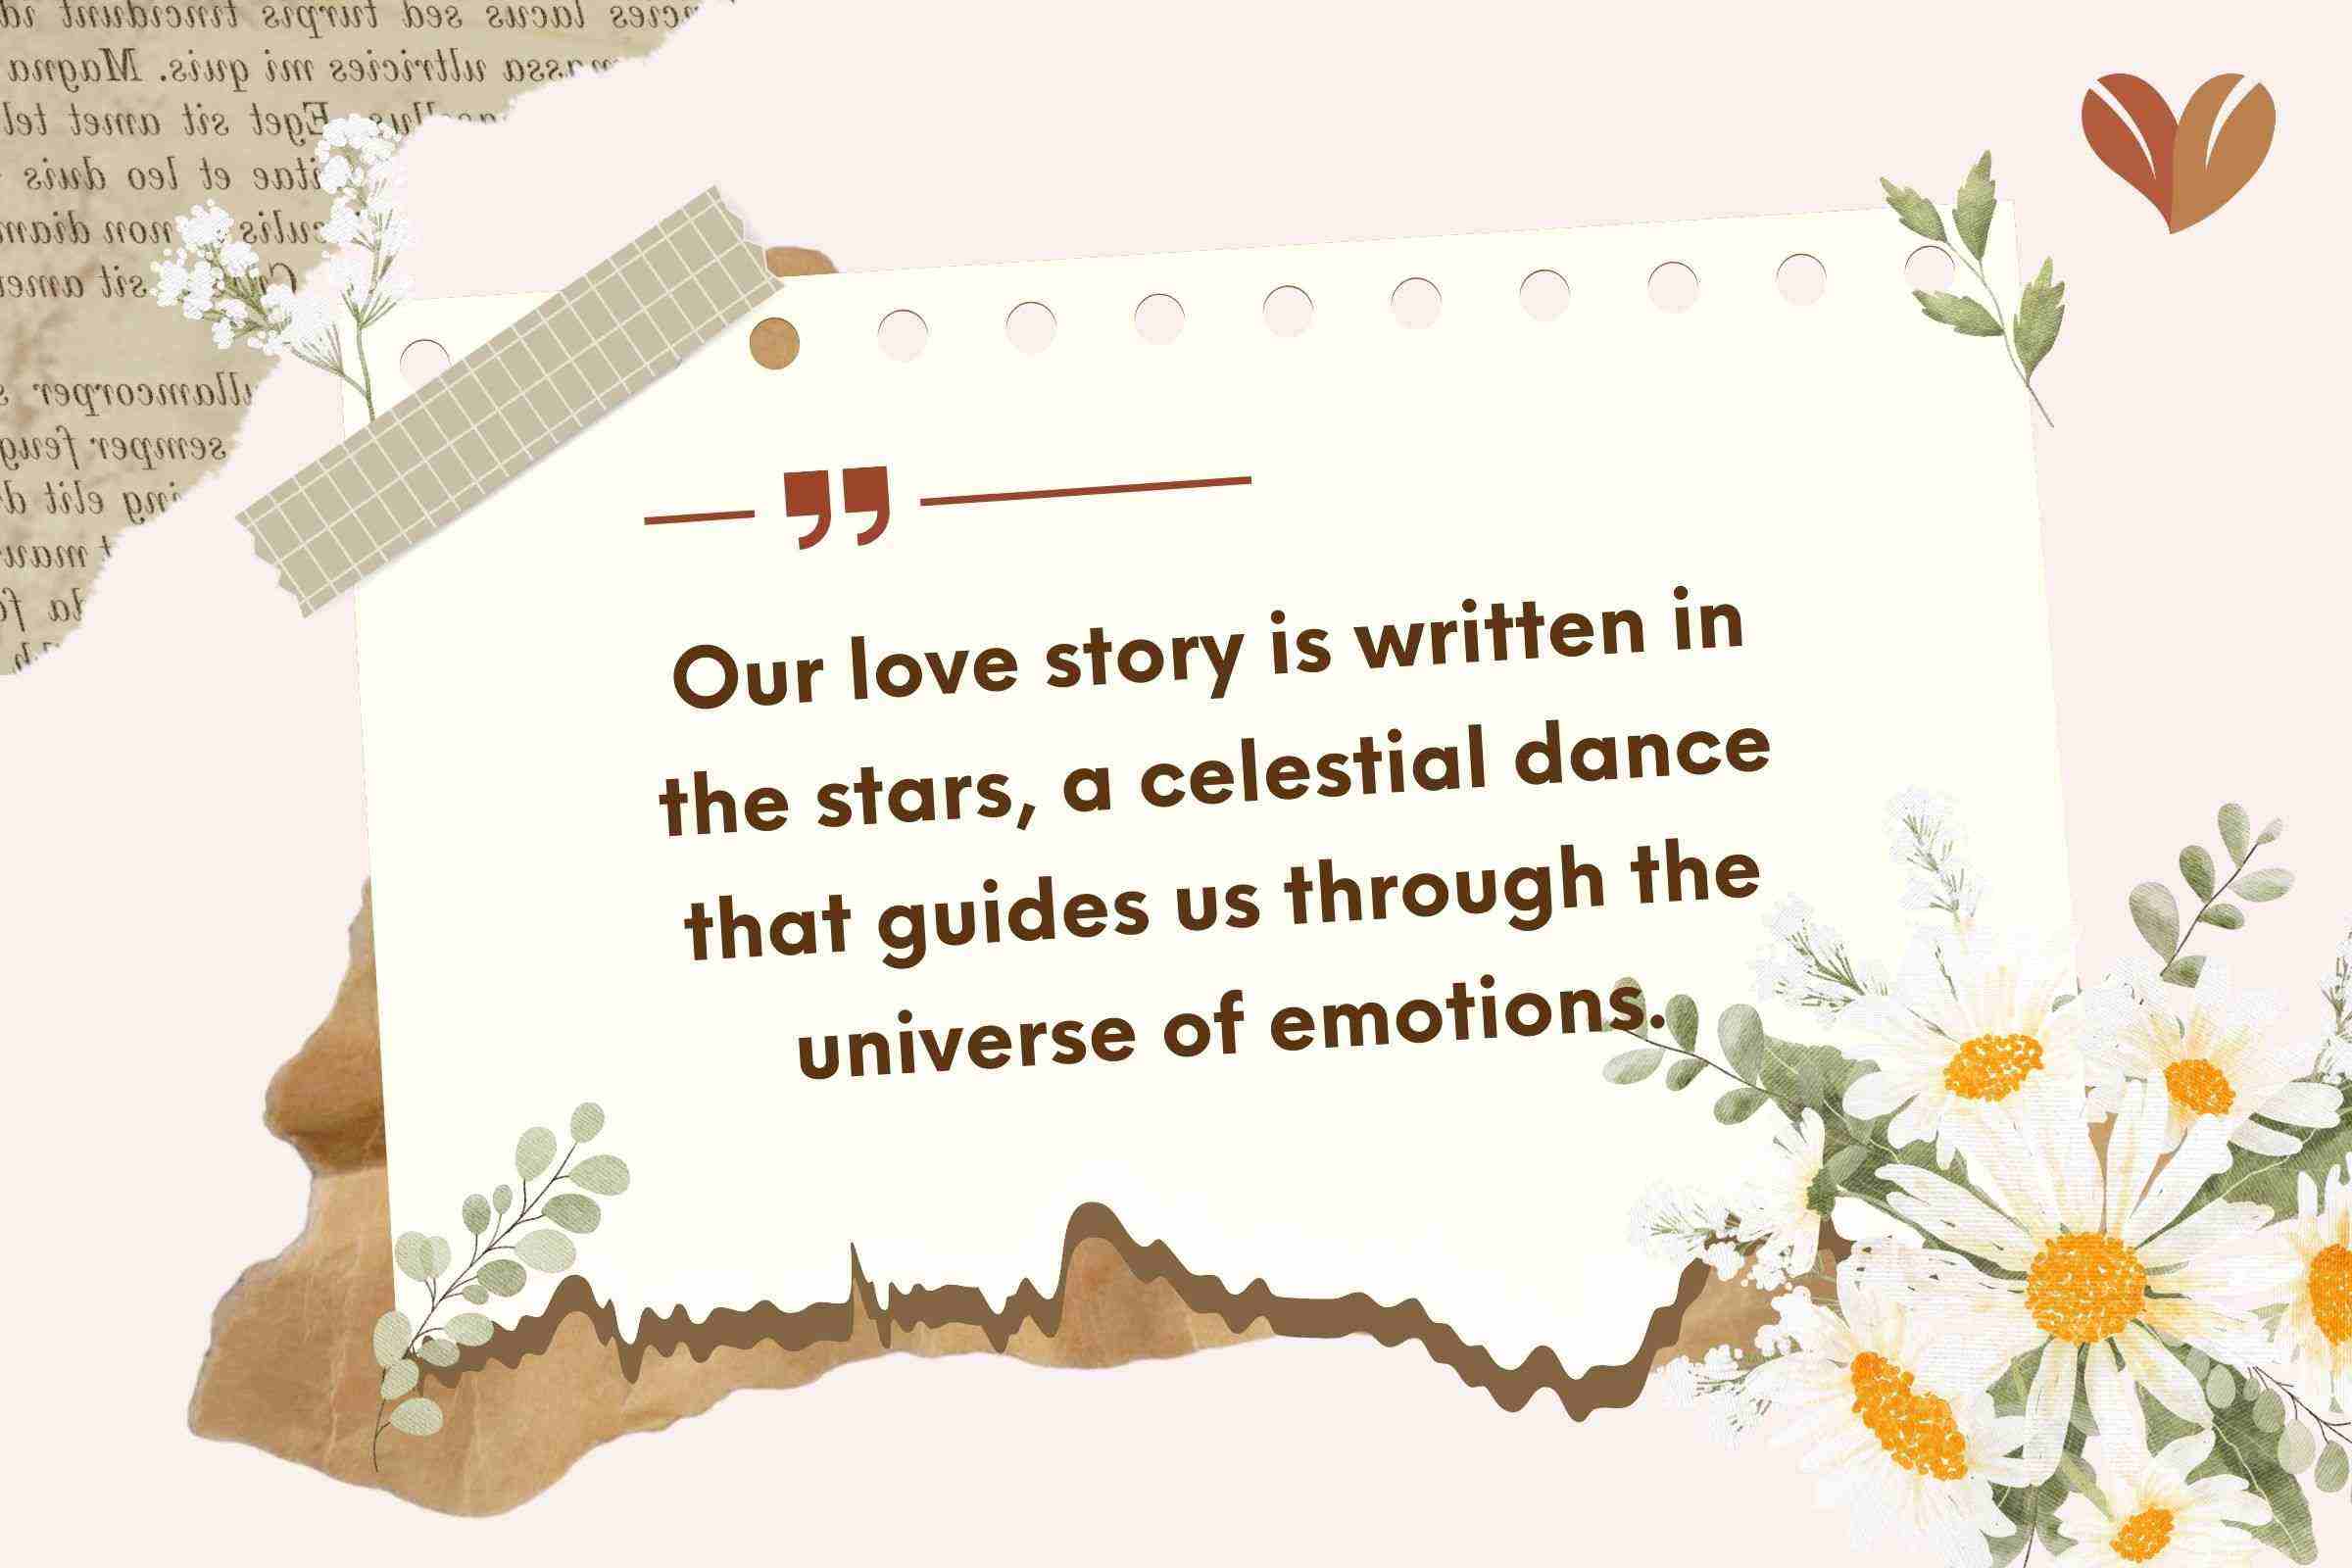 Our love story is written in the stars, a celestial dance that guides us through the universe of emotions.